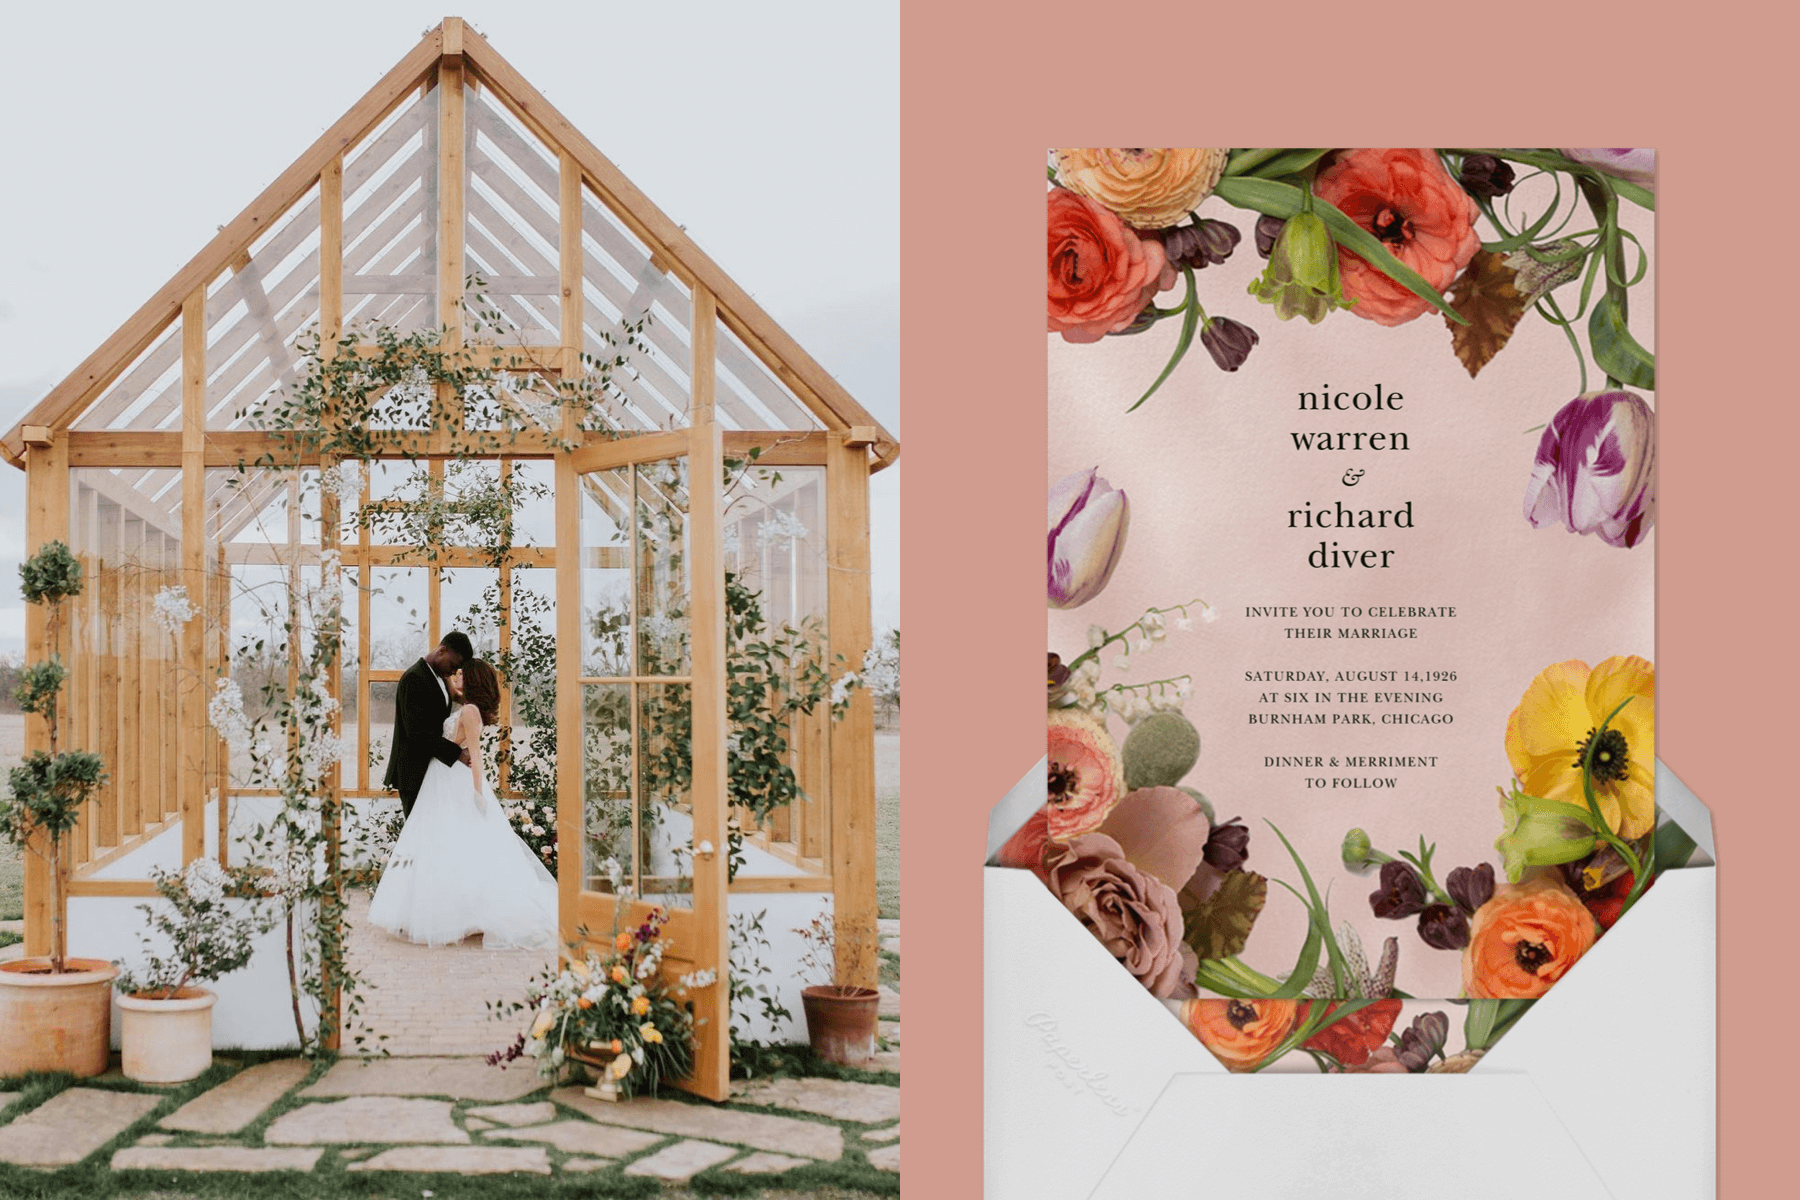 Left: A bride and groom share a kiss inside of a greenhouse. | Right: A floral wedding invitation.